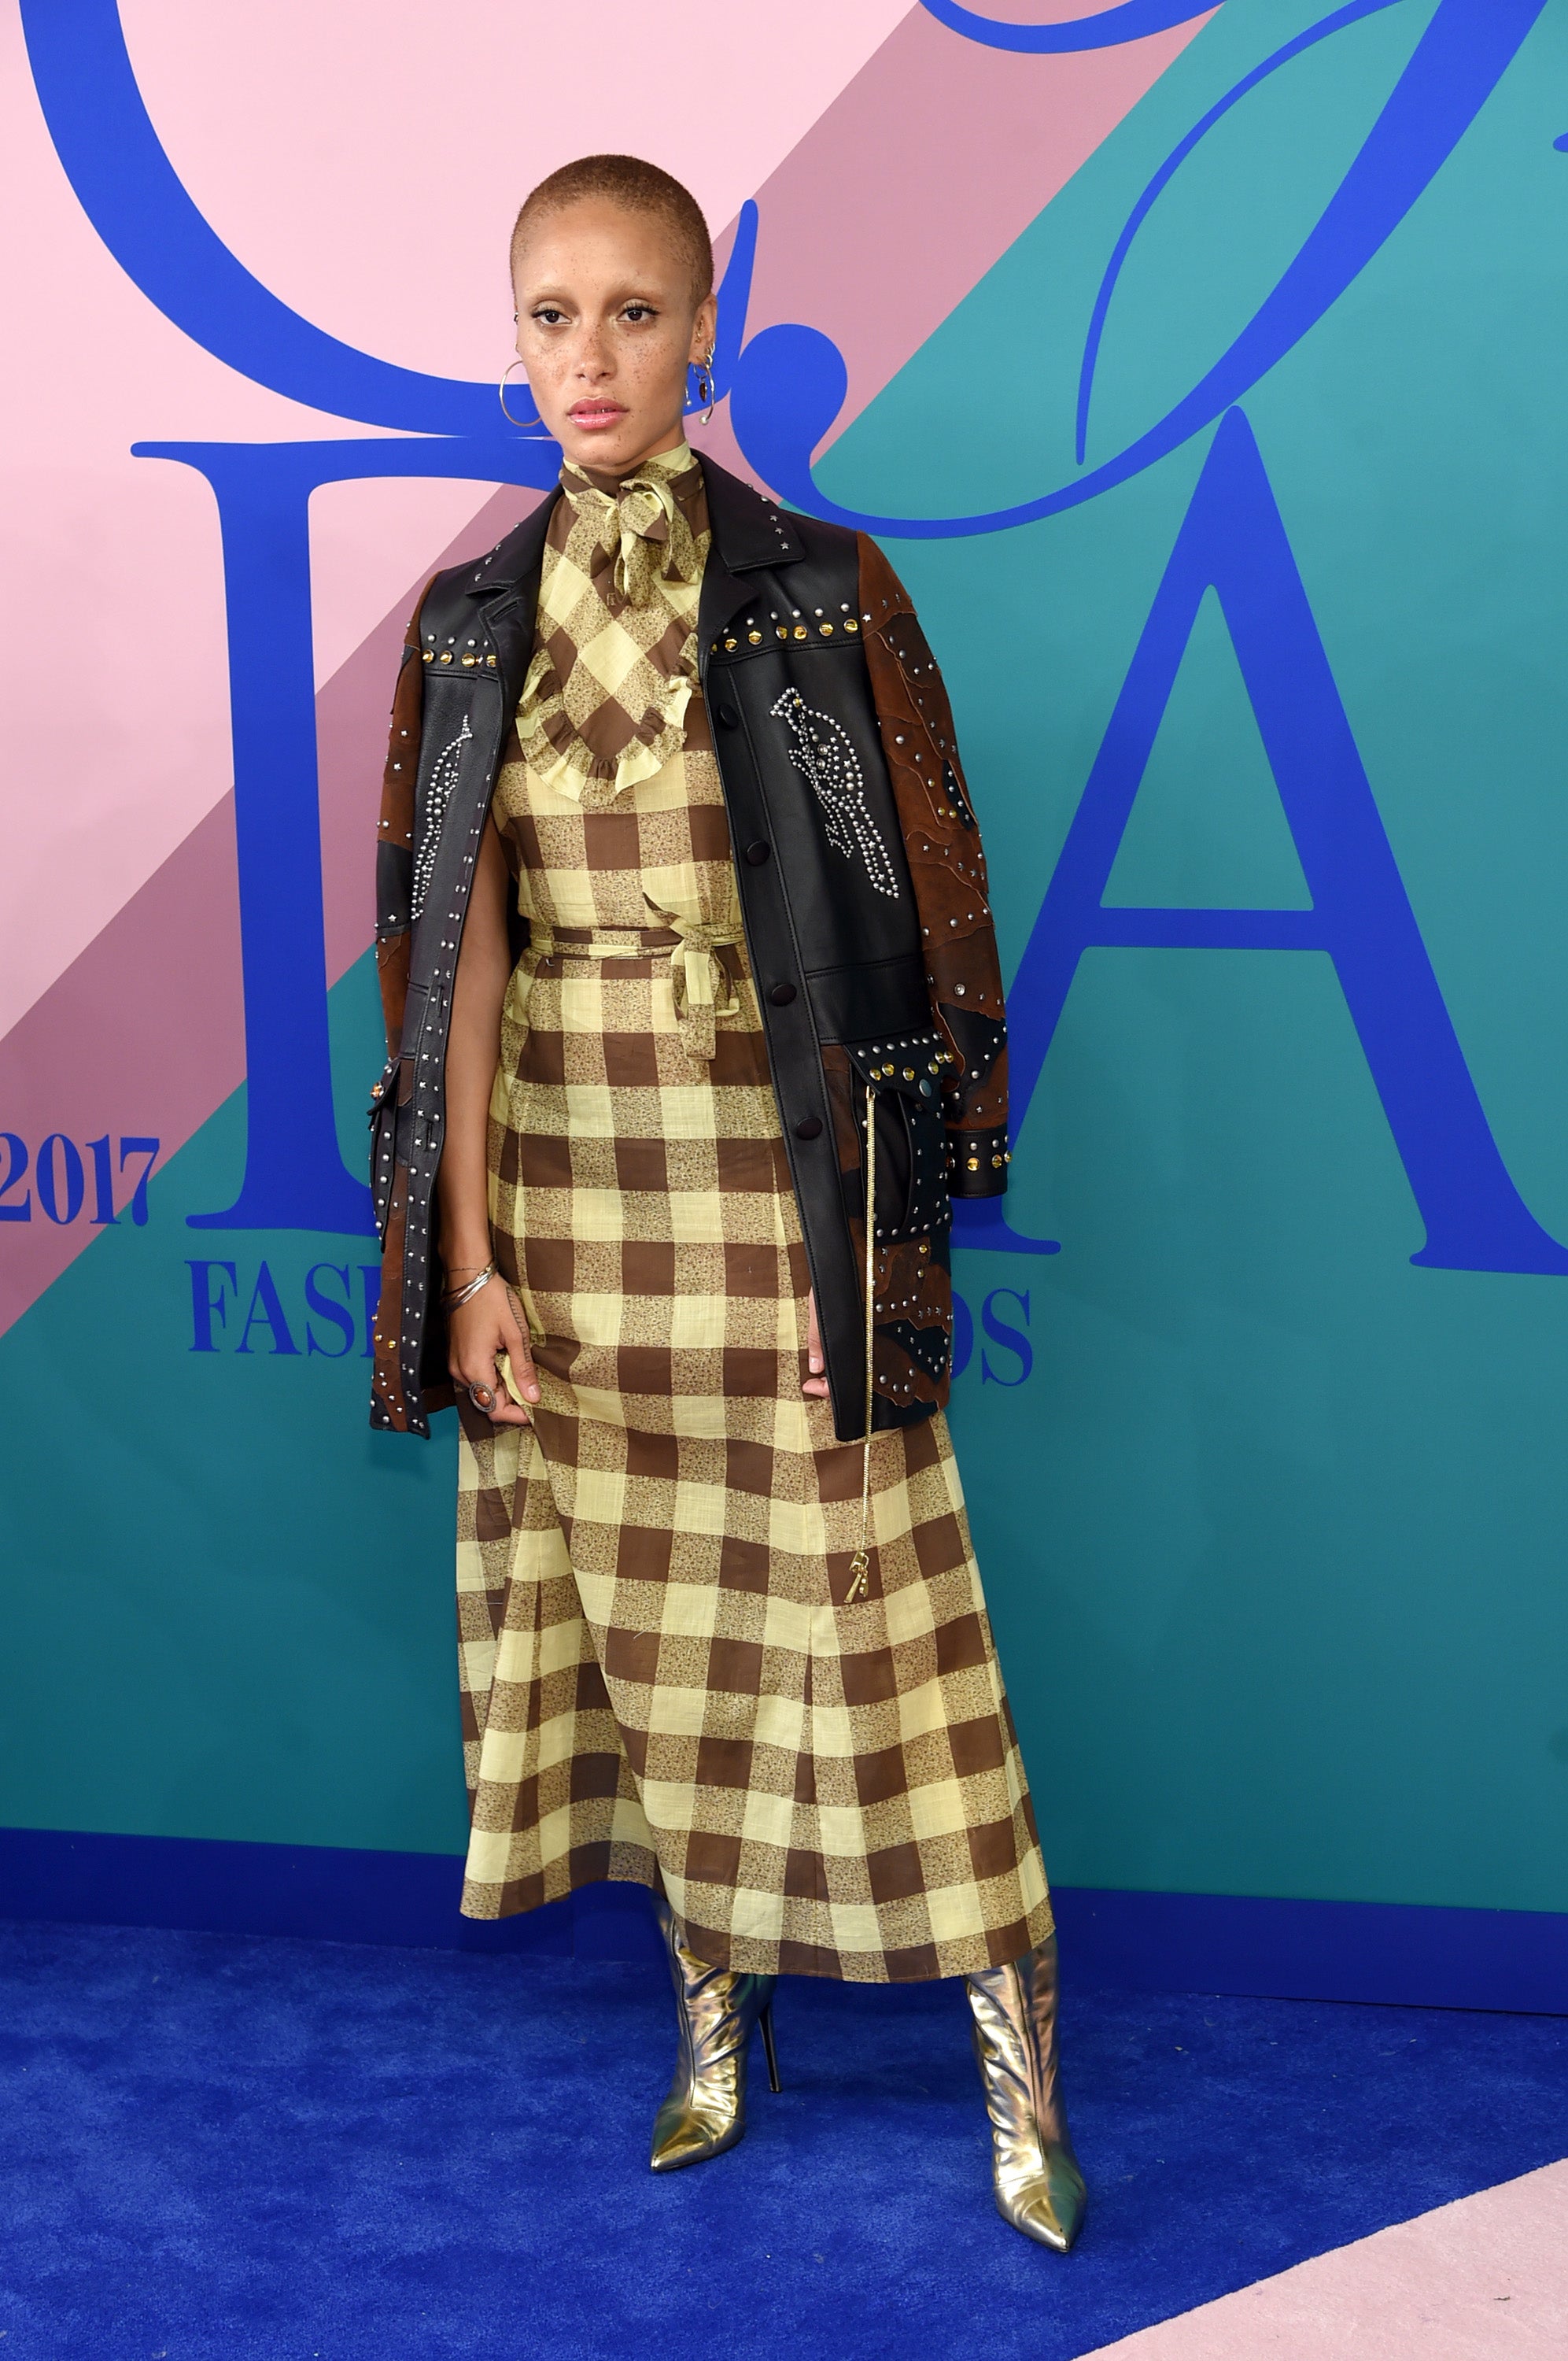 Kerry Washington, Gabrielle Union, Janelle Monae and More Slay the 2017 CFDA Awards Red Carpet
